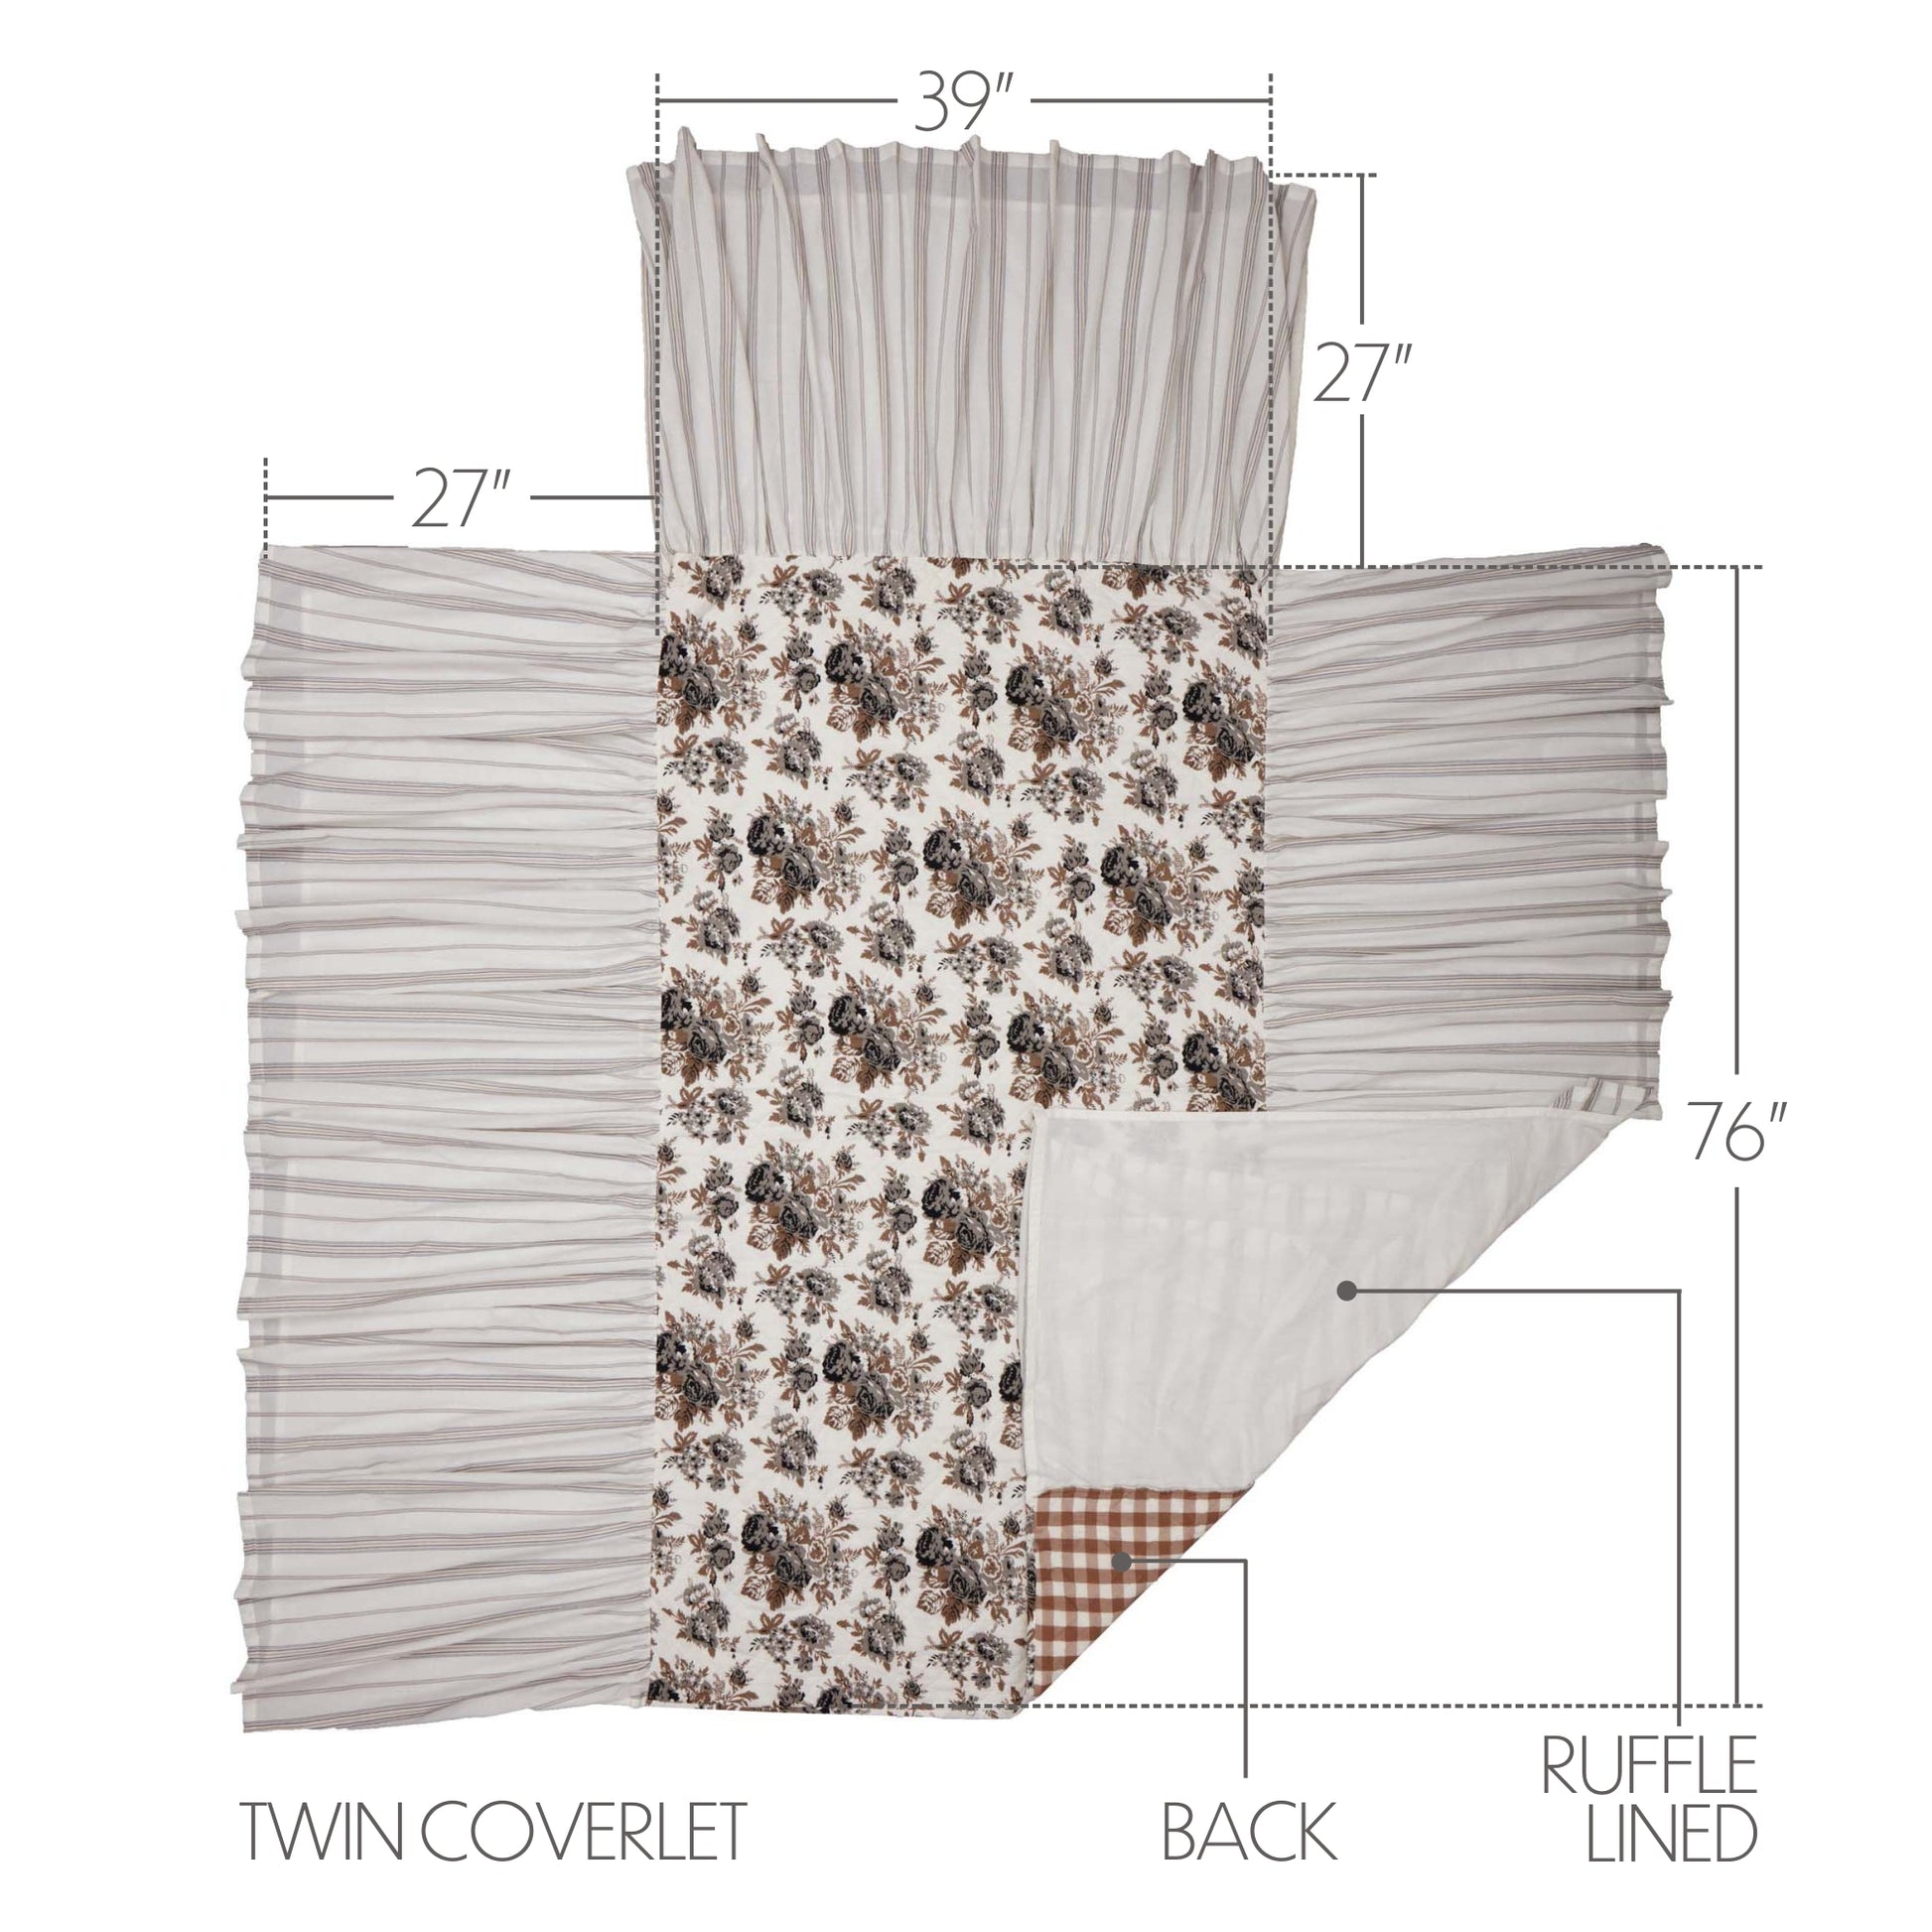 70013-Annie-Portabella-Floral-Ruffled-Twin-Coverlet-76x39-27-image-8